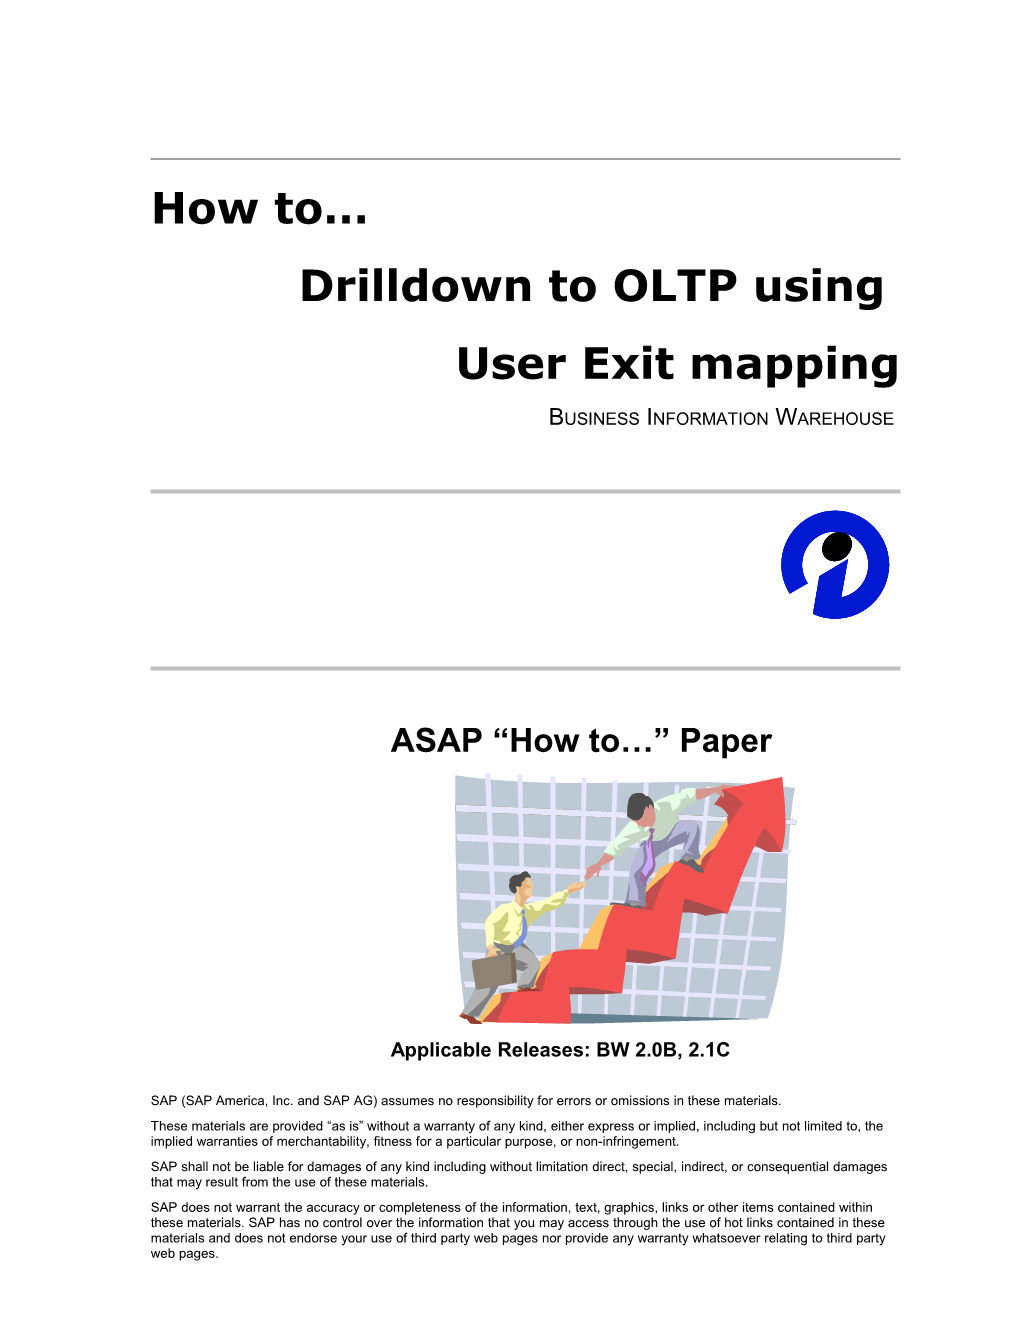 How to Drilldown to OLTP Using User Exit Mapping